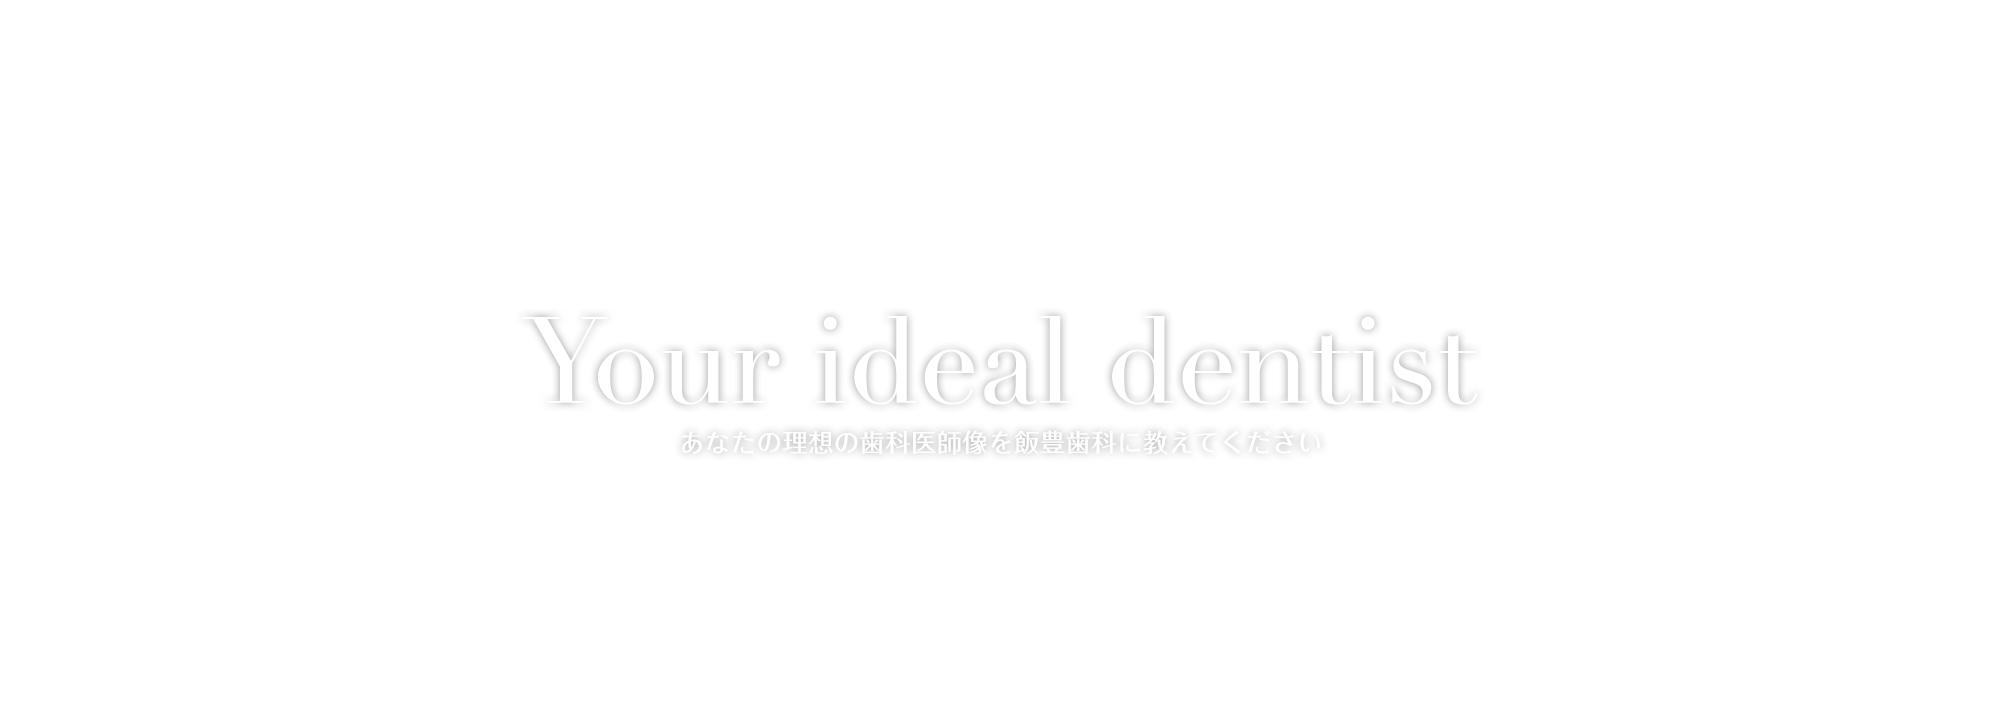 Your ideal dentist あなたの理想の歯科医師像を飯豊歯科に教えてください